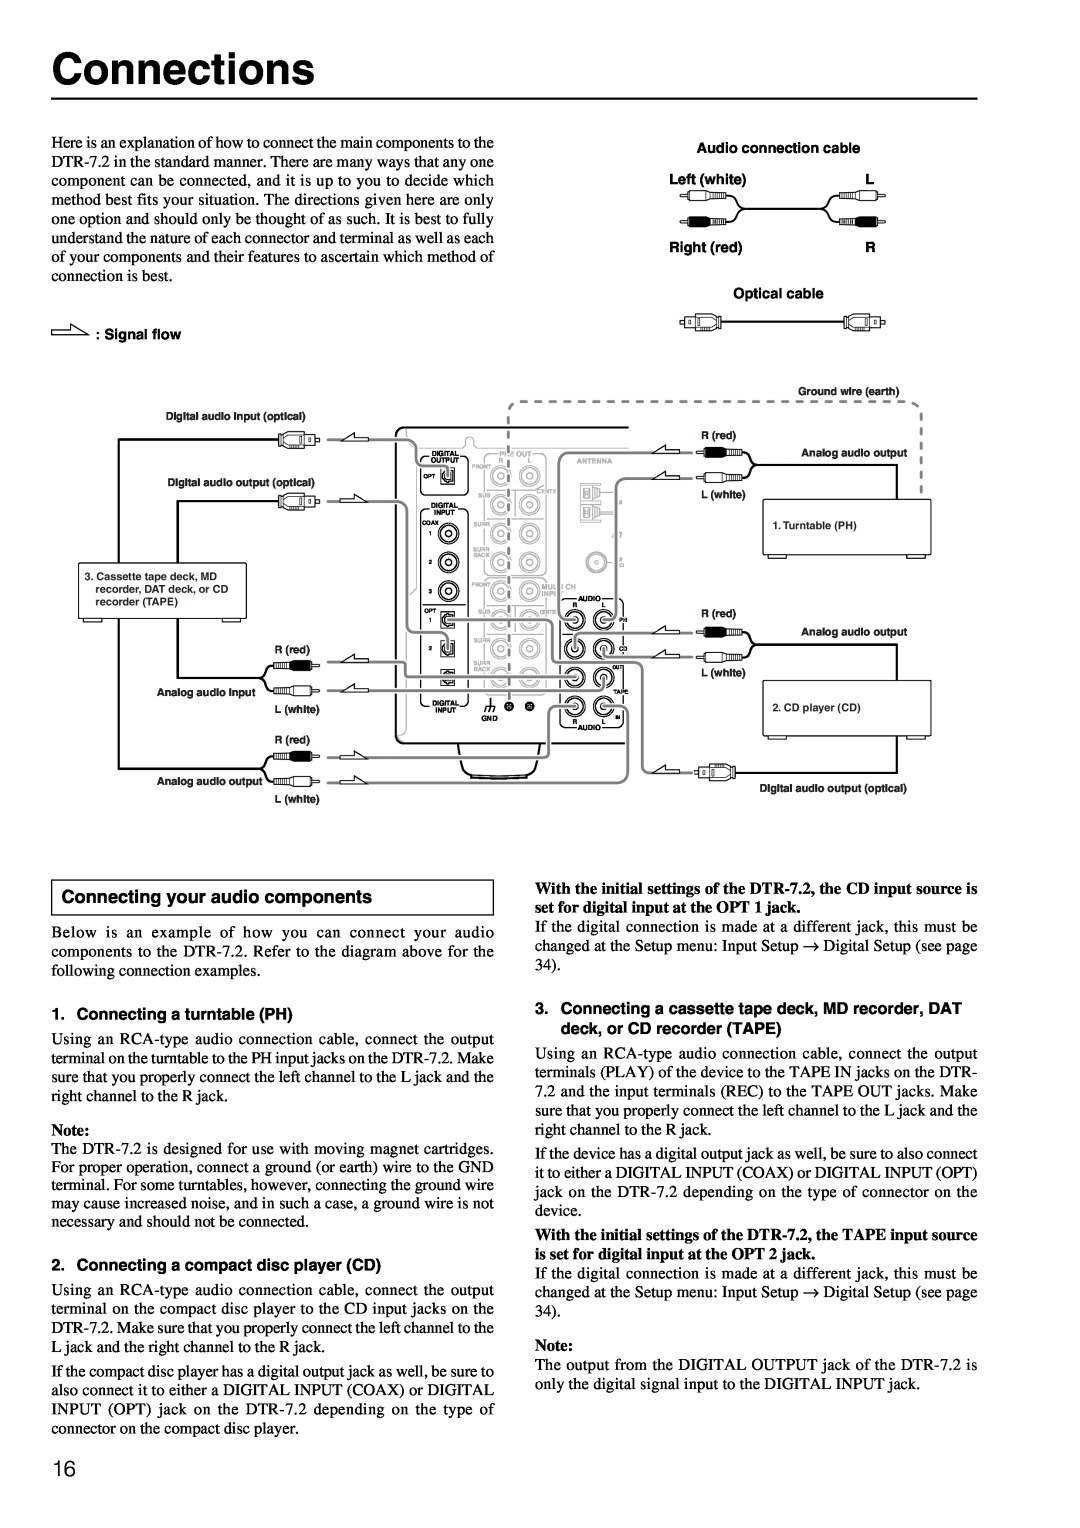 Integra DTR-7.2 instruction manual Connections, Connecting your audio components 